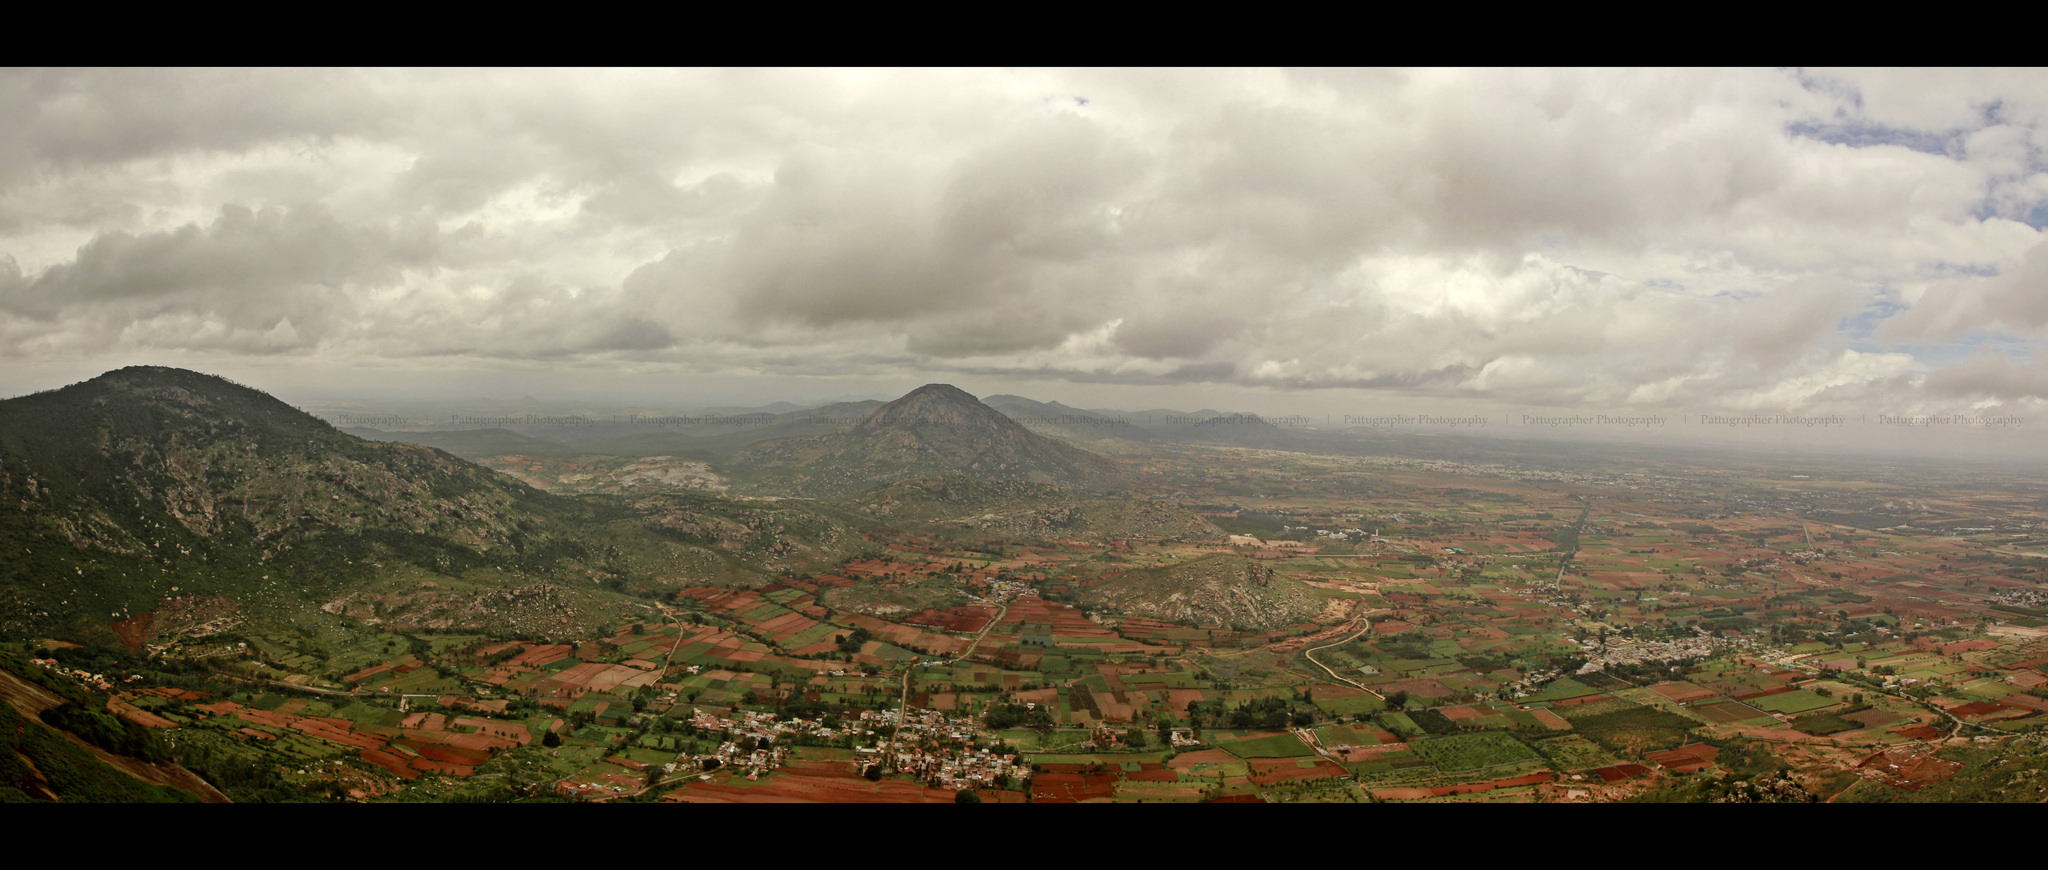 Nandi Hills More Your One Day Trip Guide From Bangalore Travel Twosome